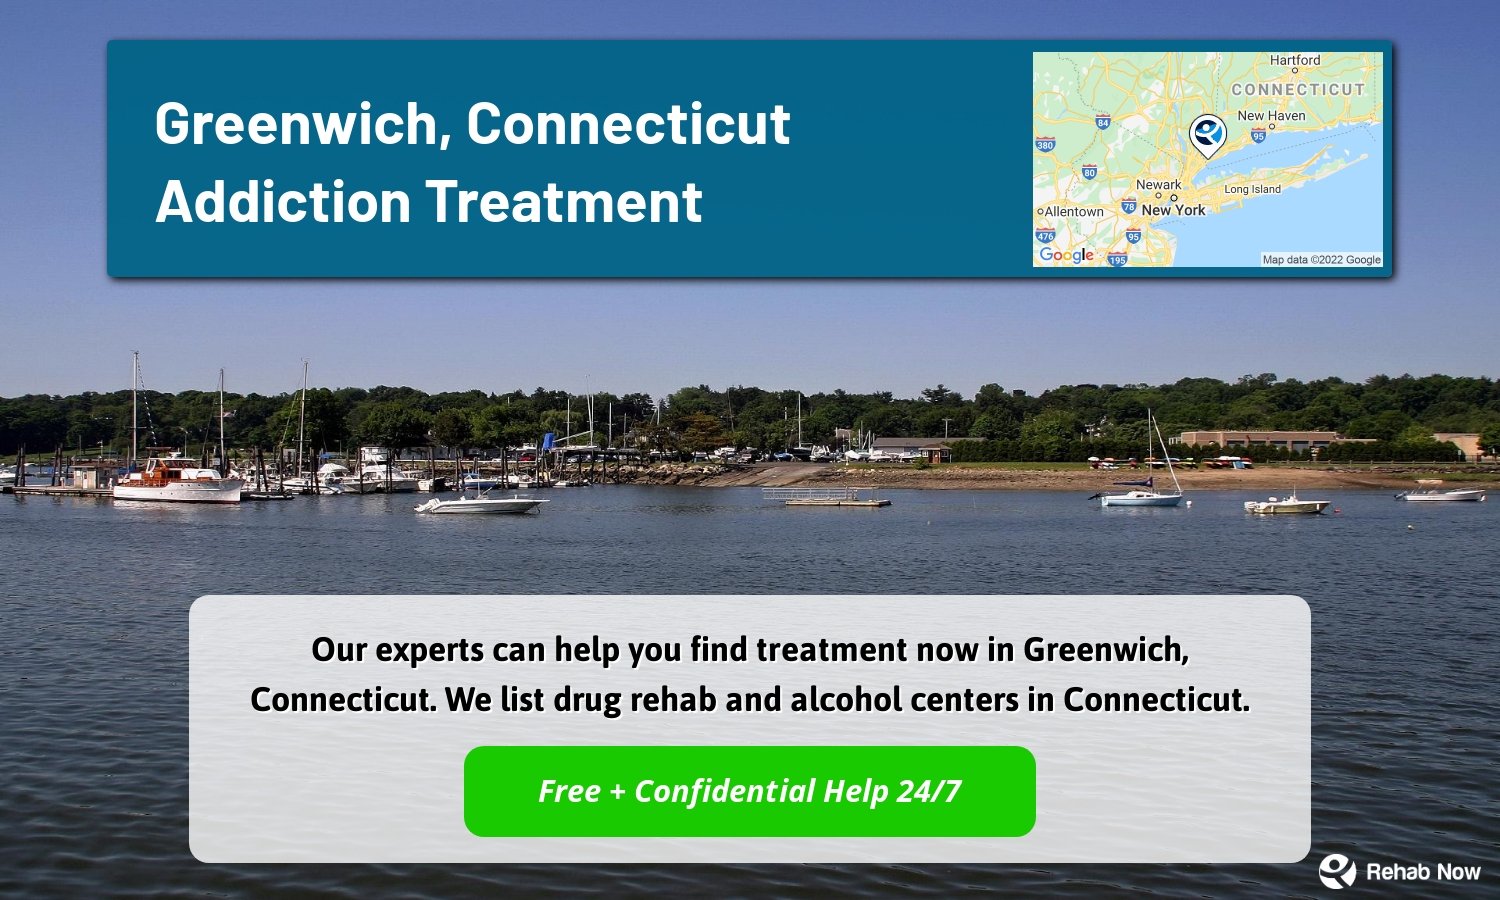 Our experts can help you find treatment now in Greenwich, Connecticut. We list drug rehab and alcohol centers in Connecticut.